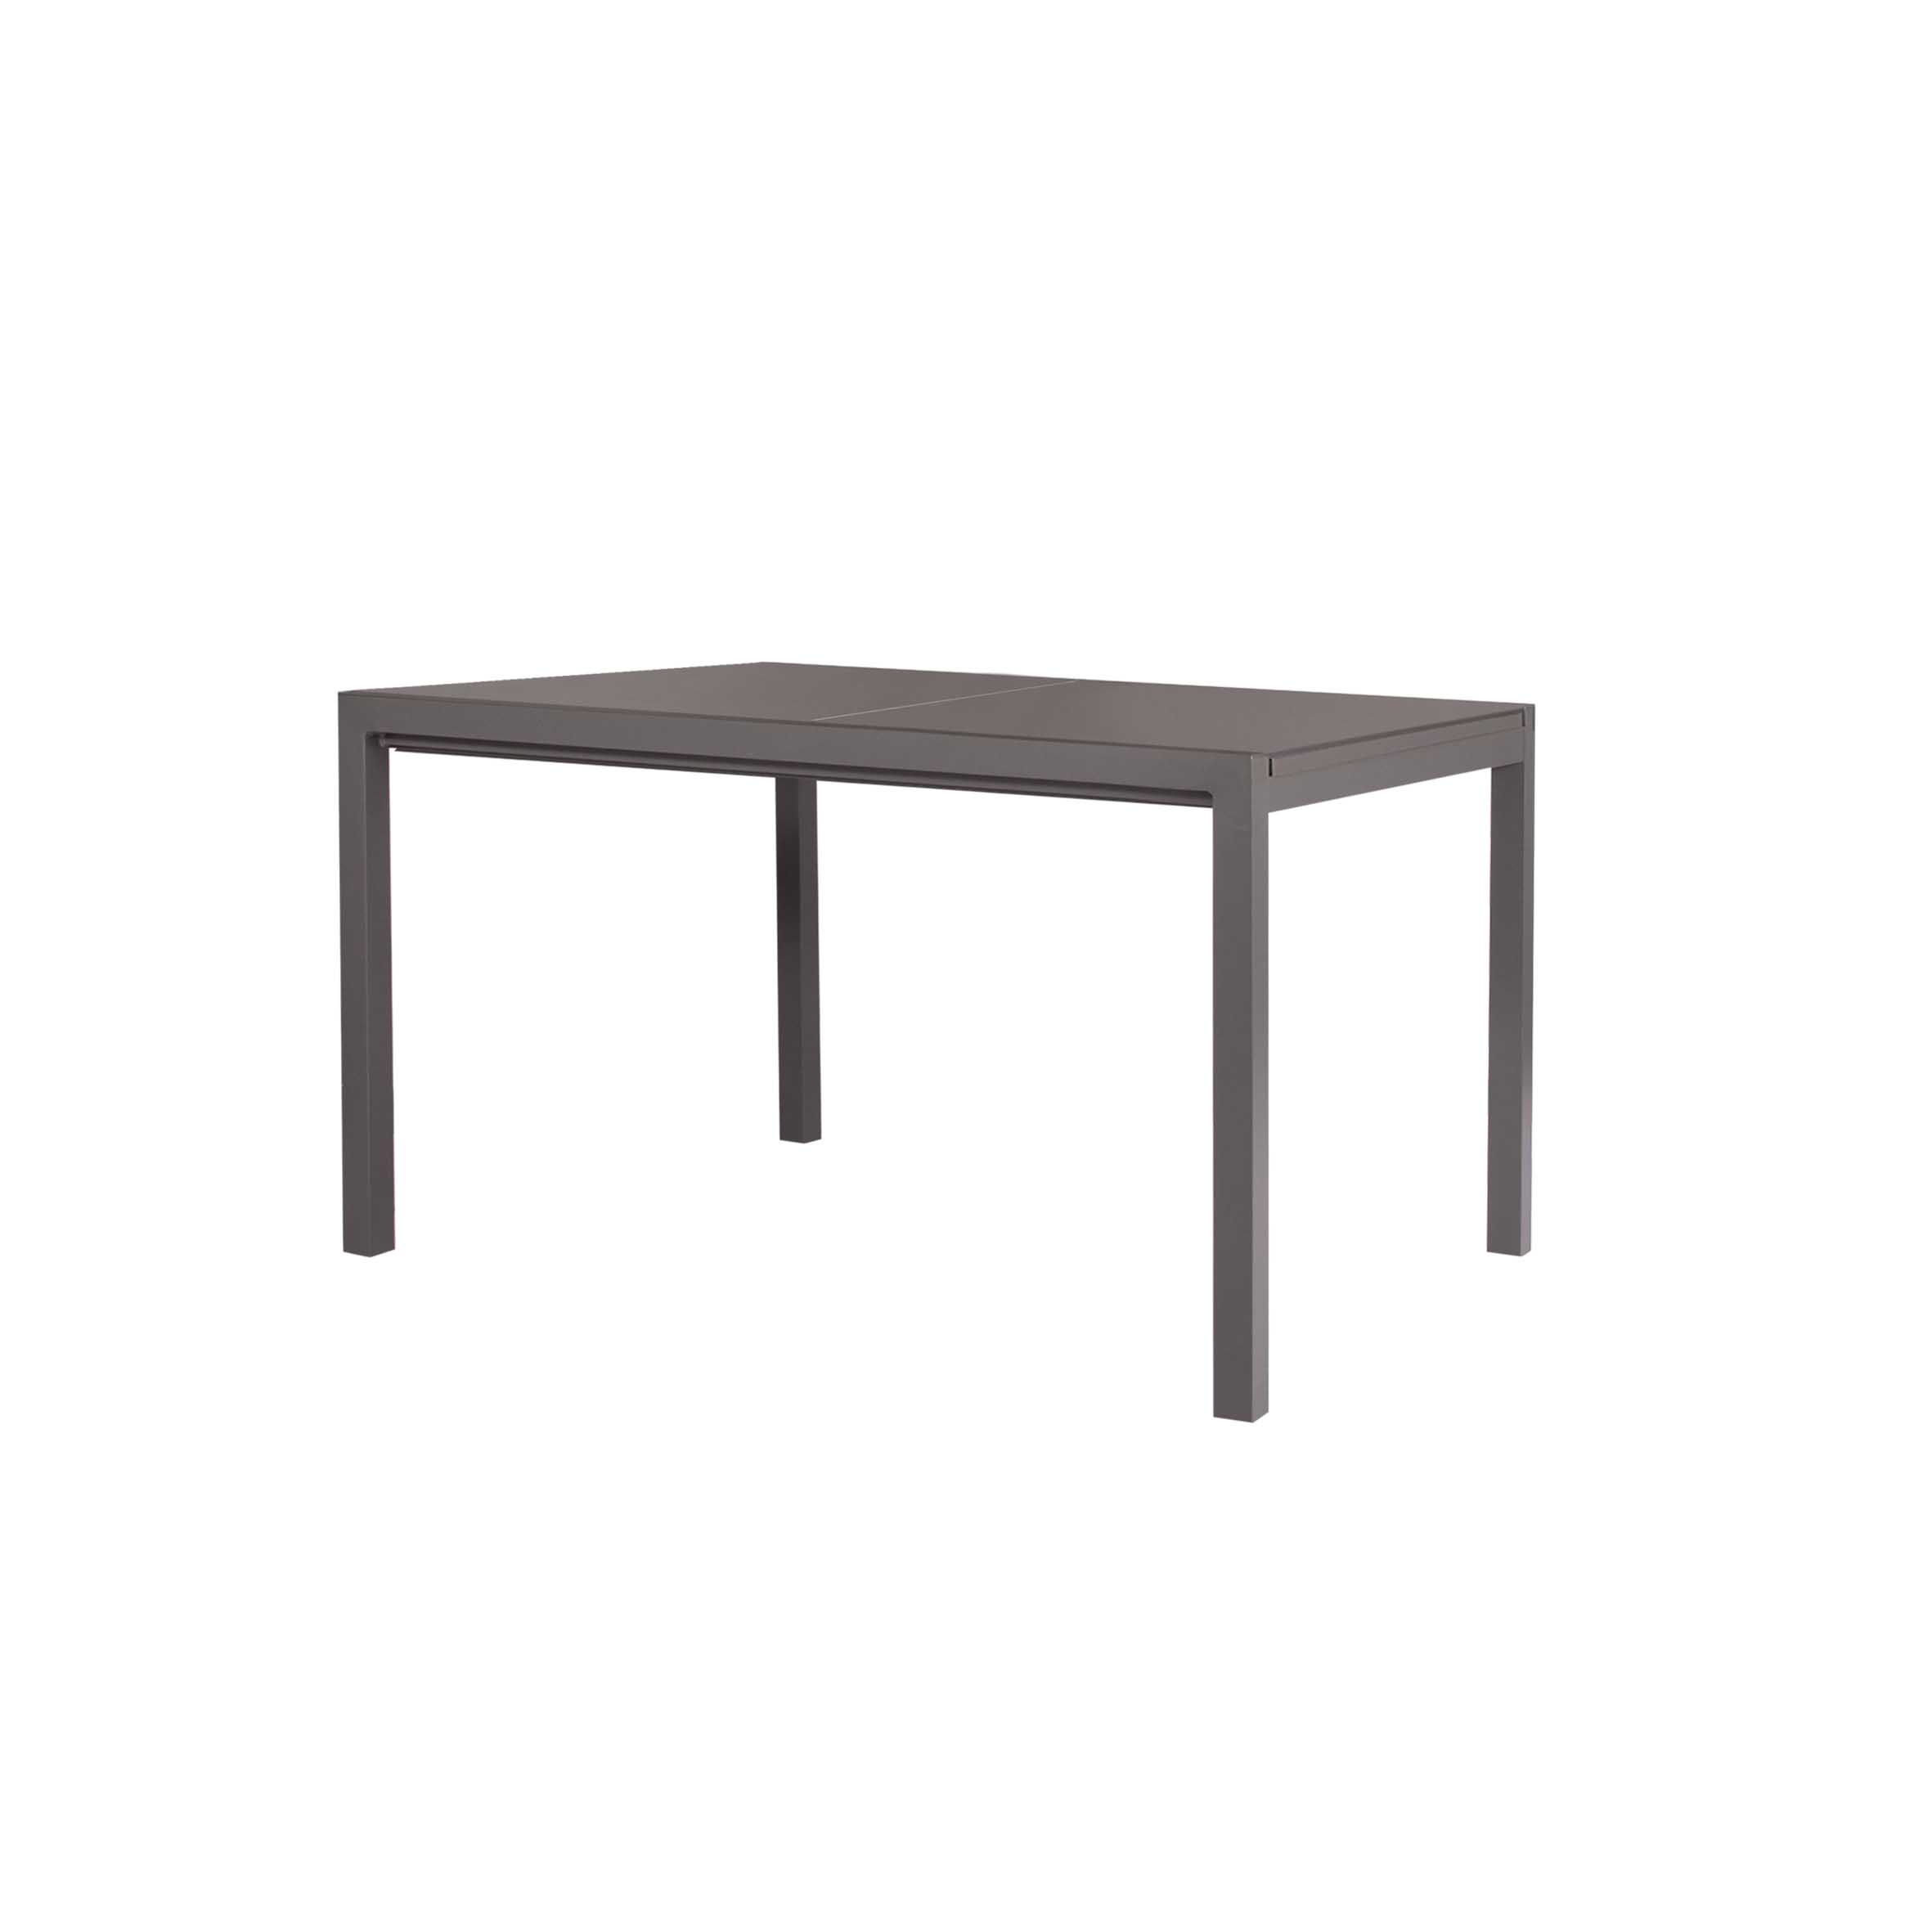 Kotka extension table S7